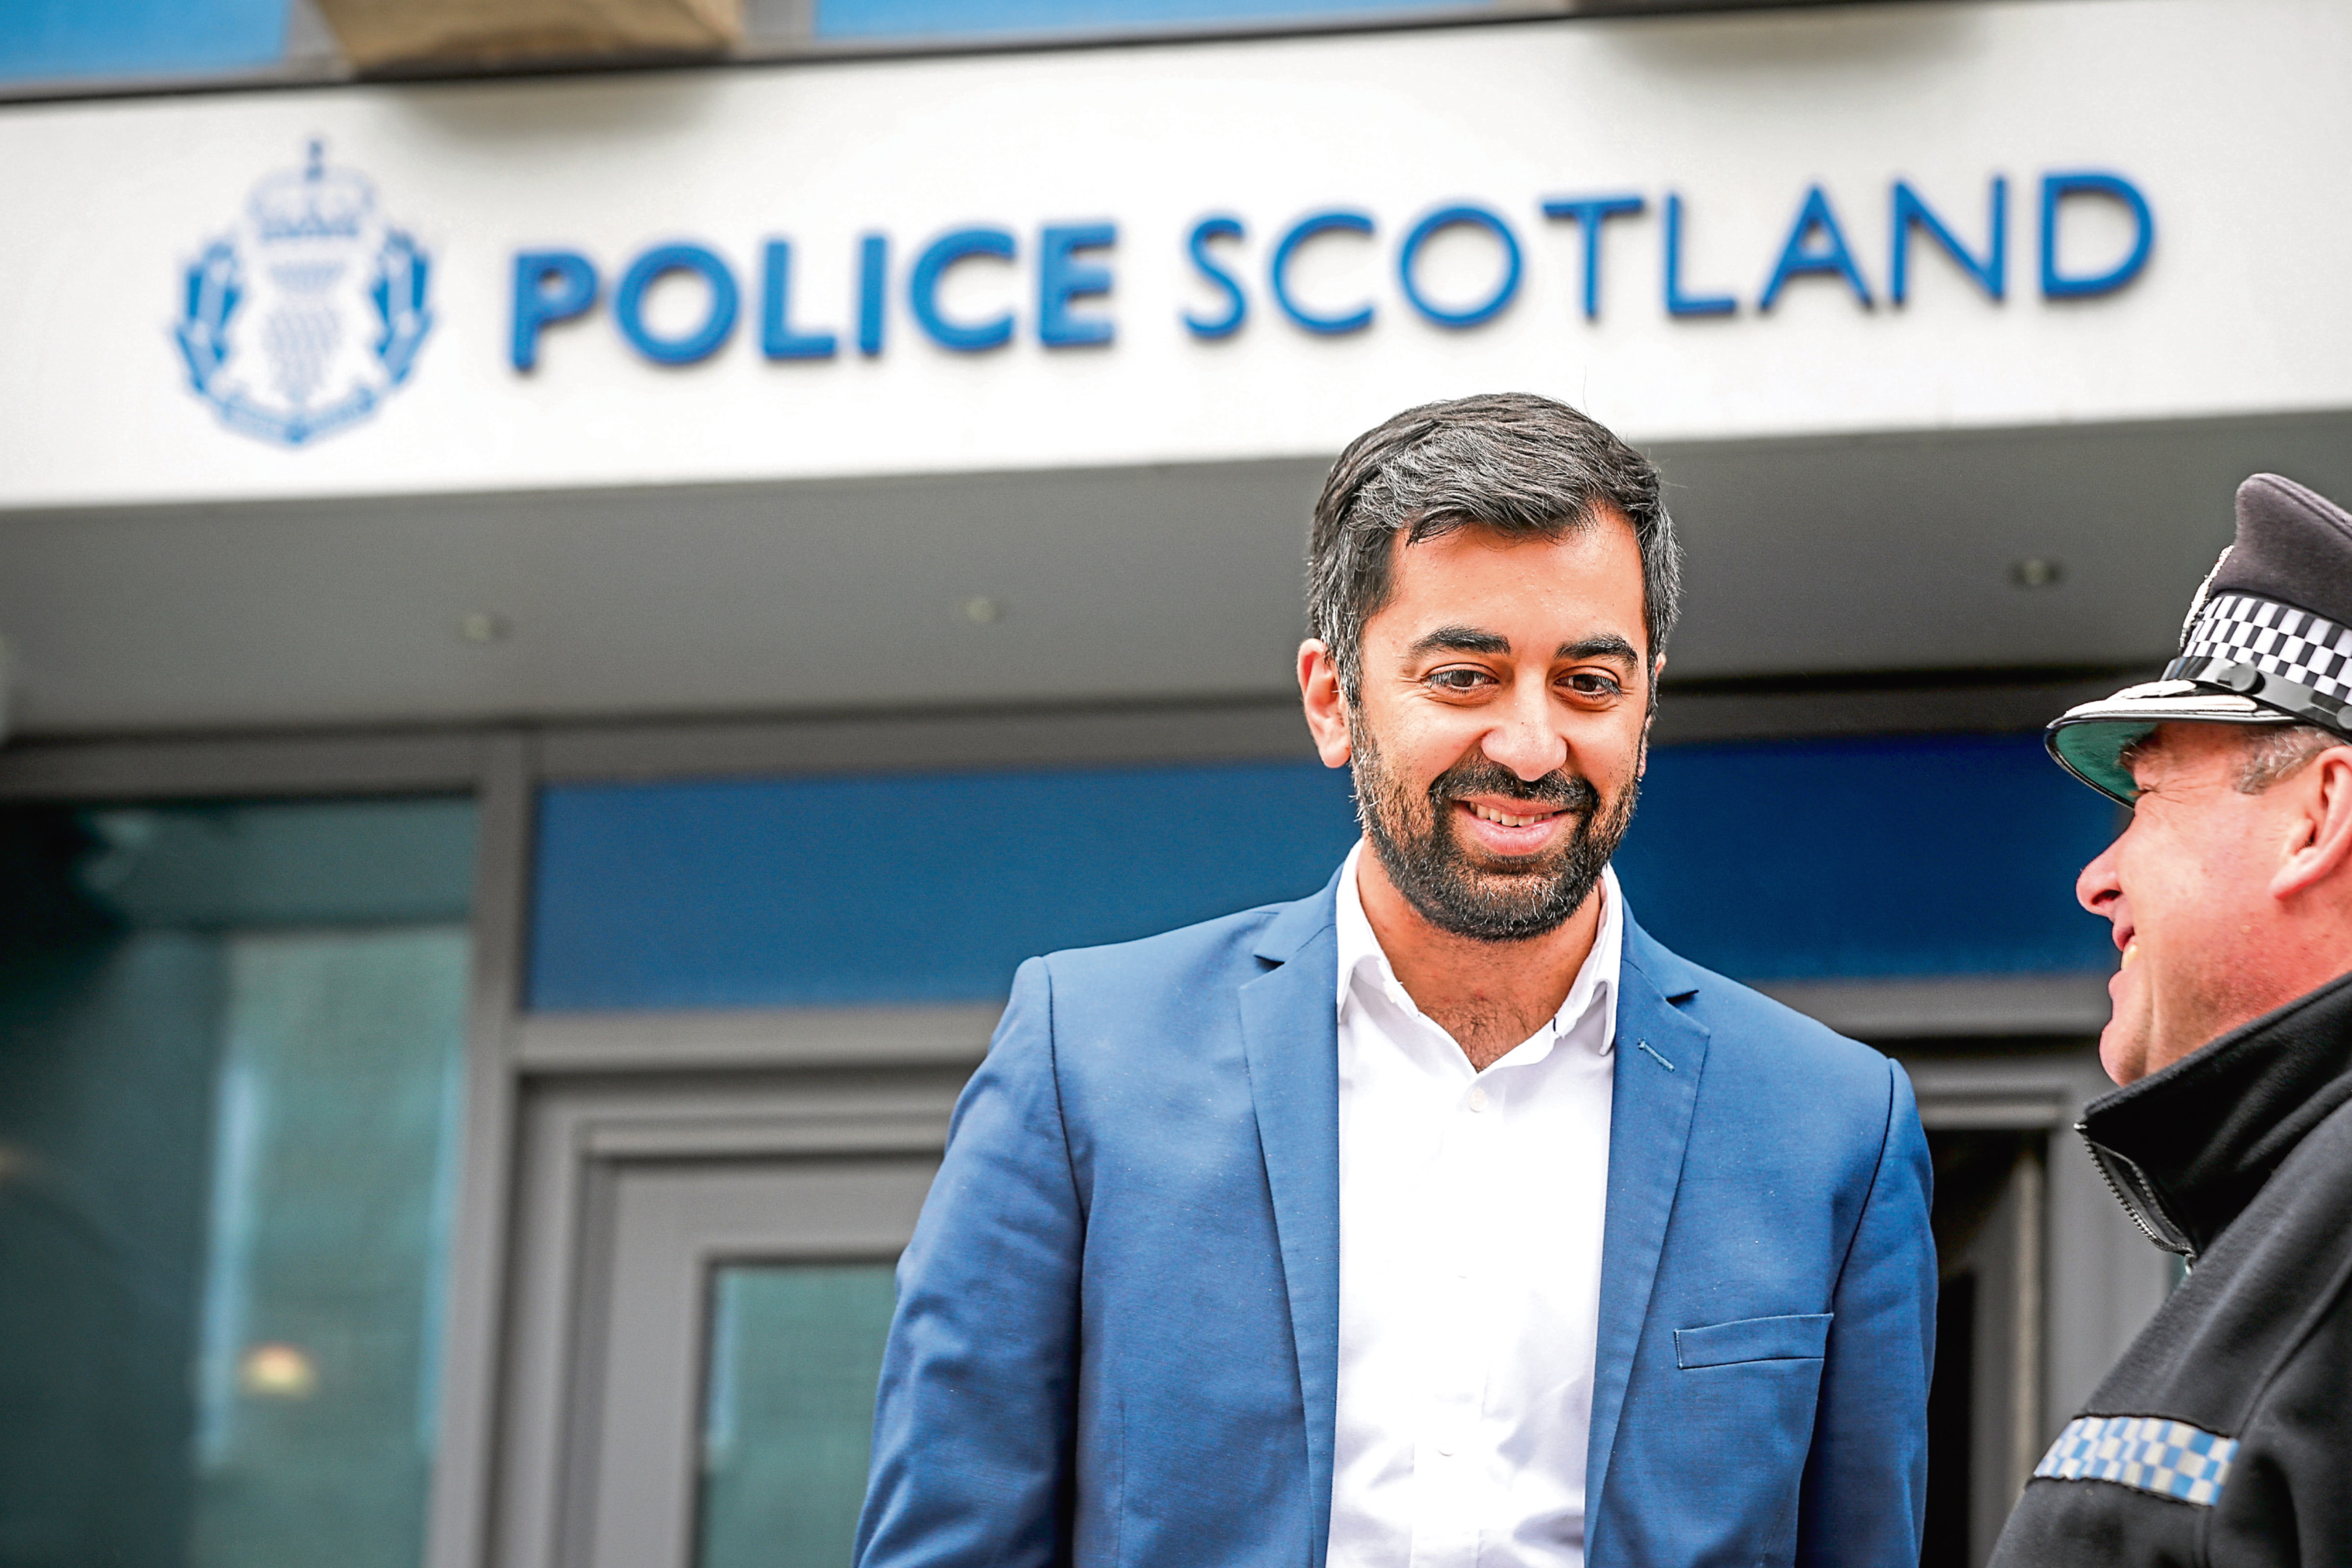 Secretary for Justice Humza Yousaf.